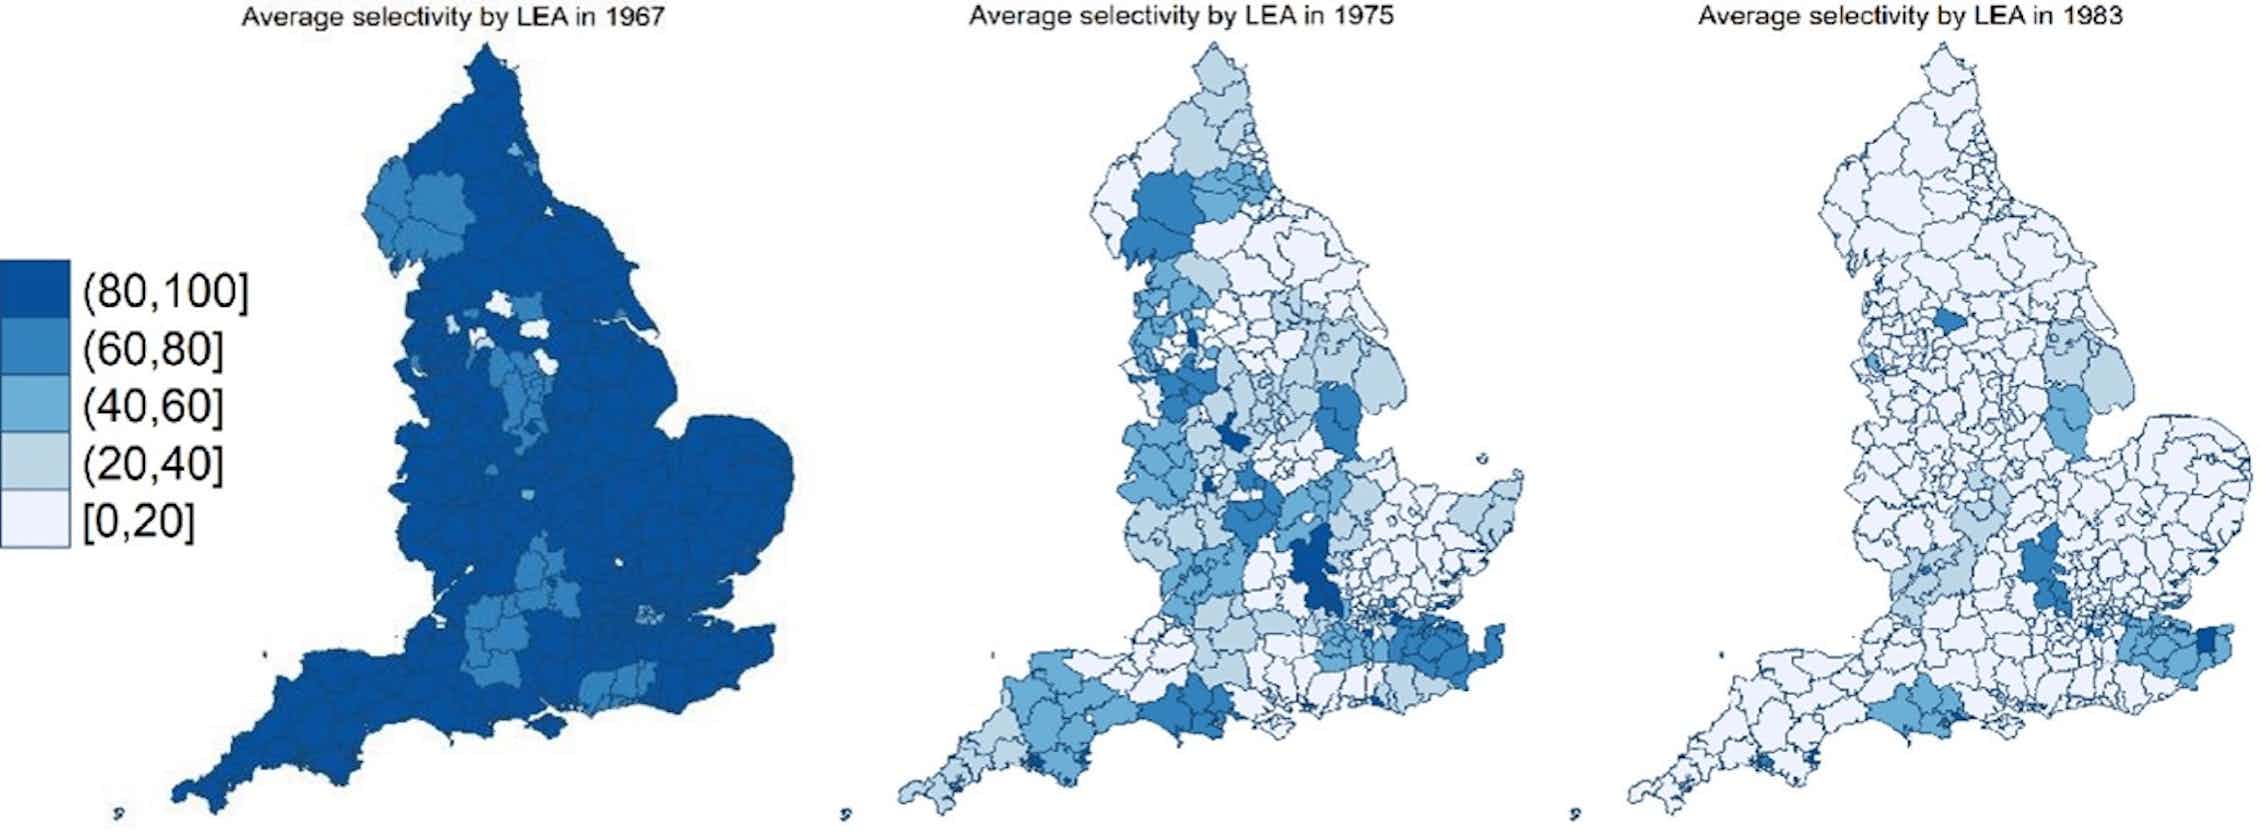 Three maps of England and Wales map showing an ever decreasing proportion of selective schooling percentages in local education authorities